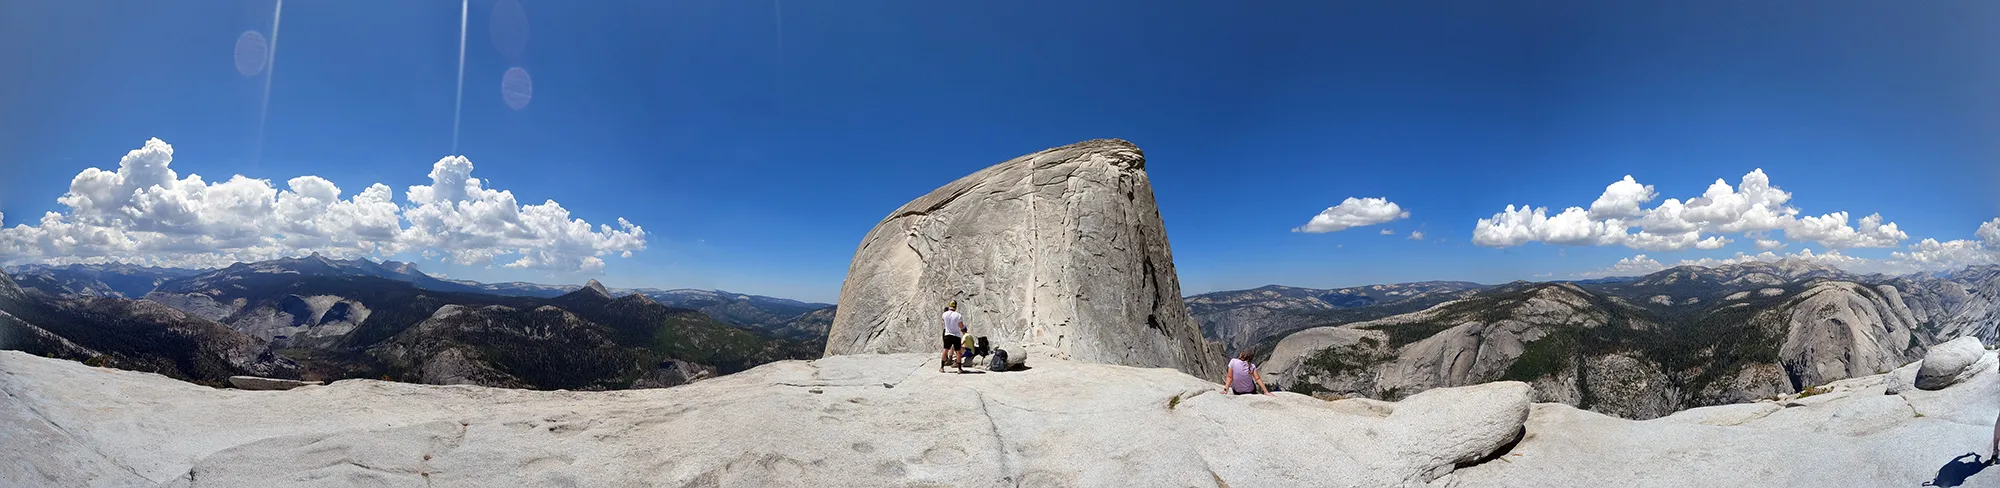 View of Half Dome from Sub Dome at Yosemite National Park, California. Panorama photo.